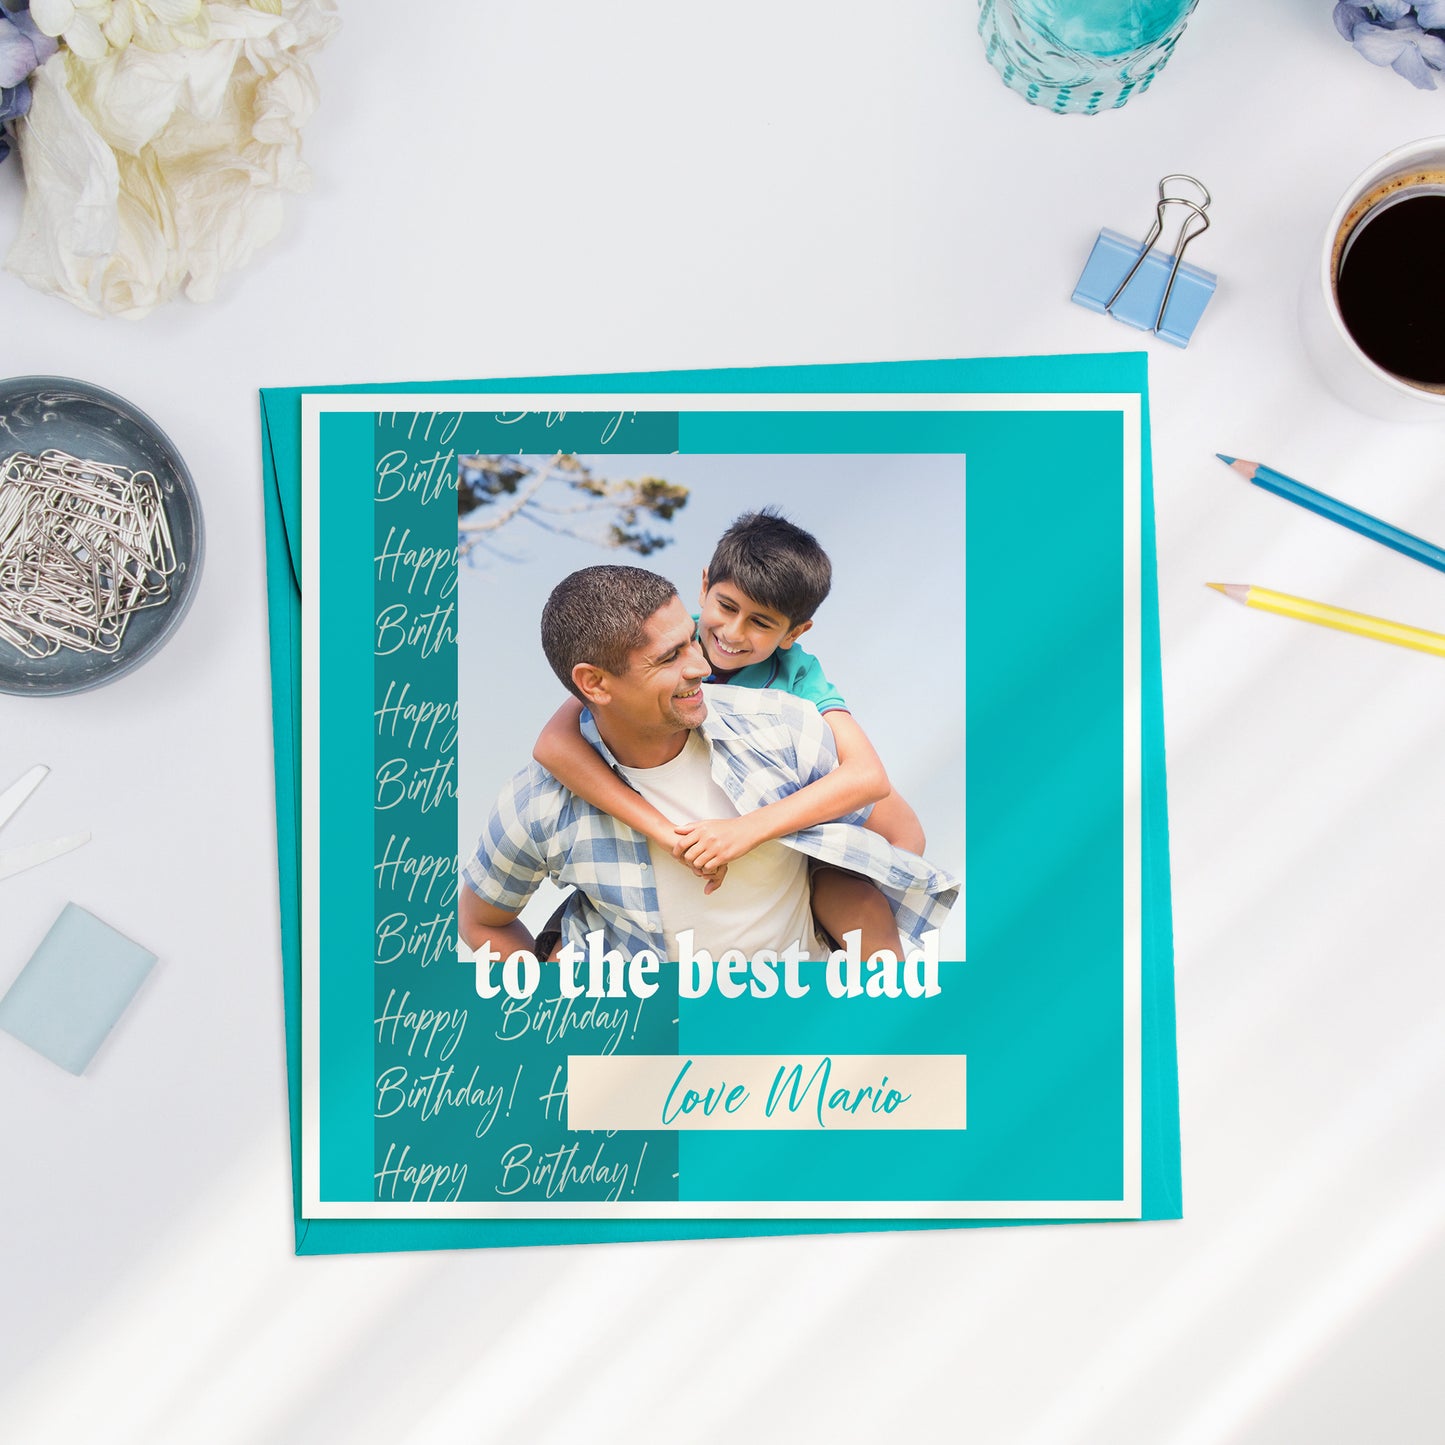 Personalised Birthday Photo Card for Dads